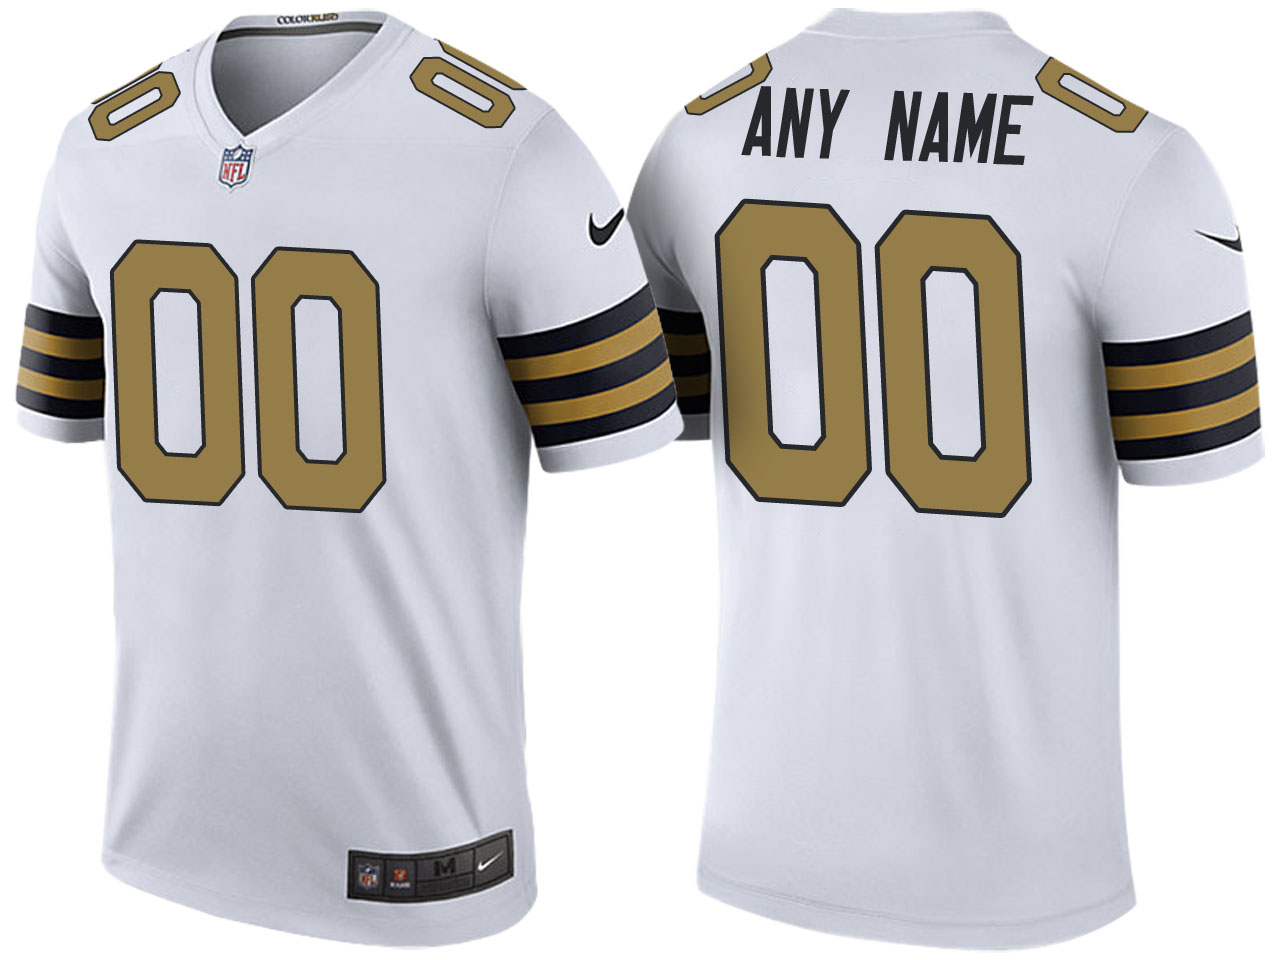 Youth Custom New Orleans Saints Nike White Color Rush Limited Kid's Personal Football Jersey